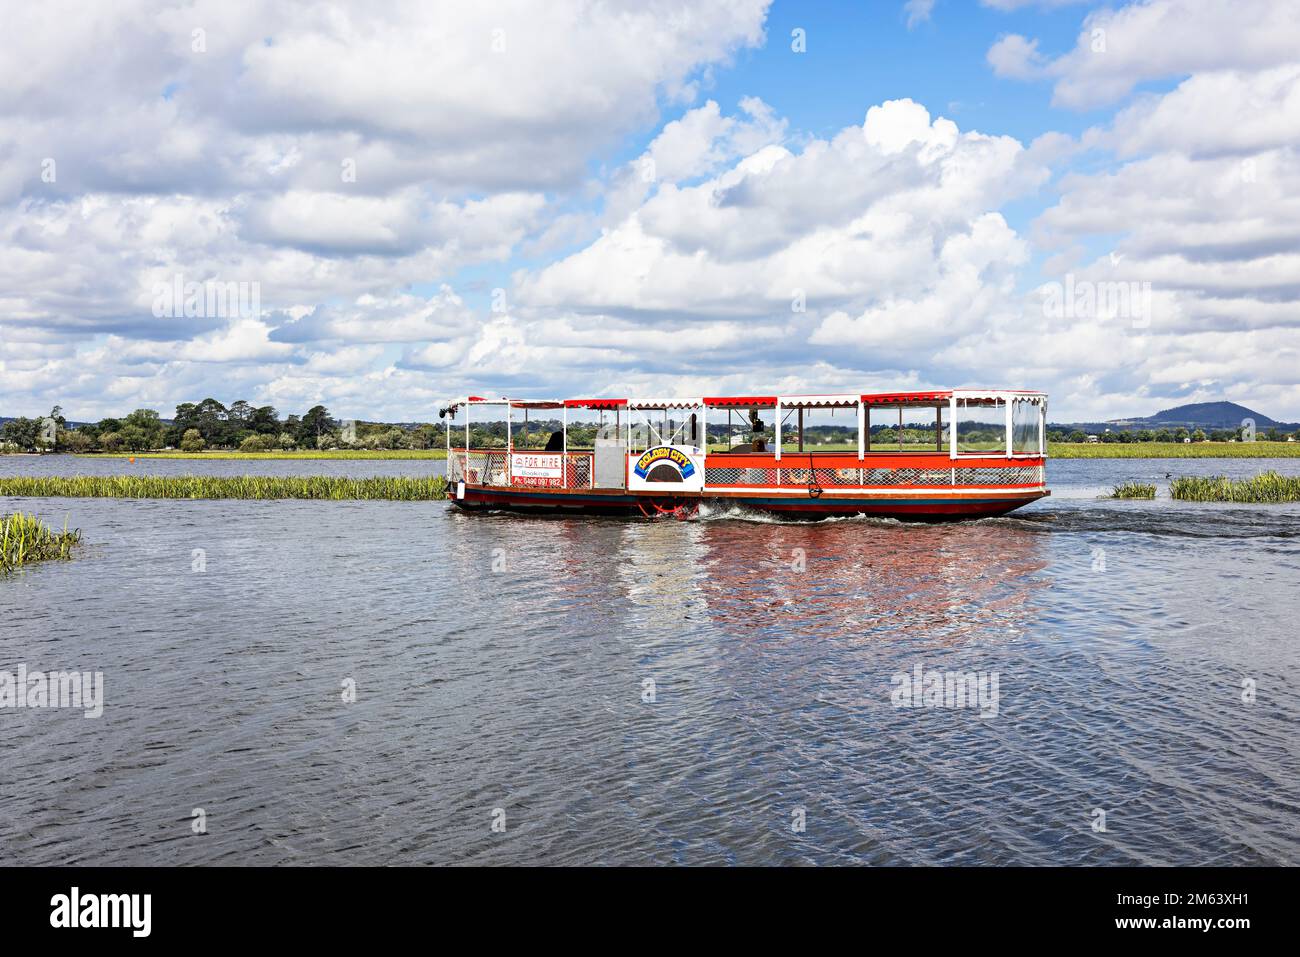 Ballarat Australia /  The Golden City Paddle Boat  heads back to the boatshed after a busy day  touring  Lake Wendouree. The Paddle Boat is a replica Stock Photo